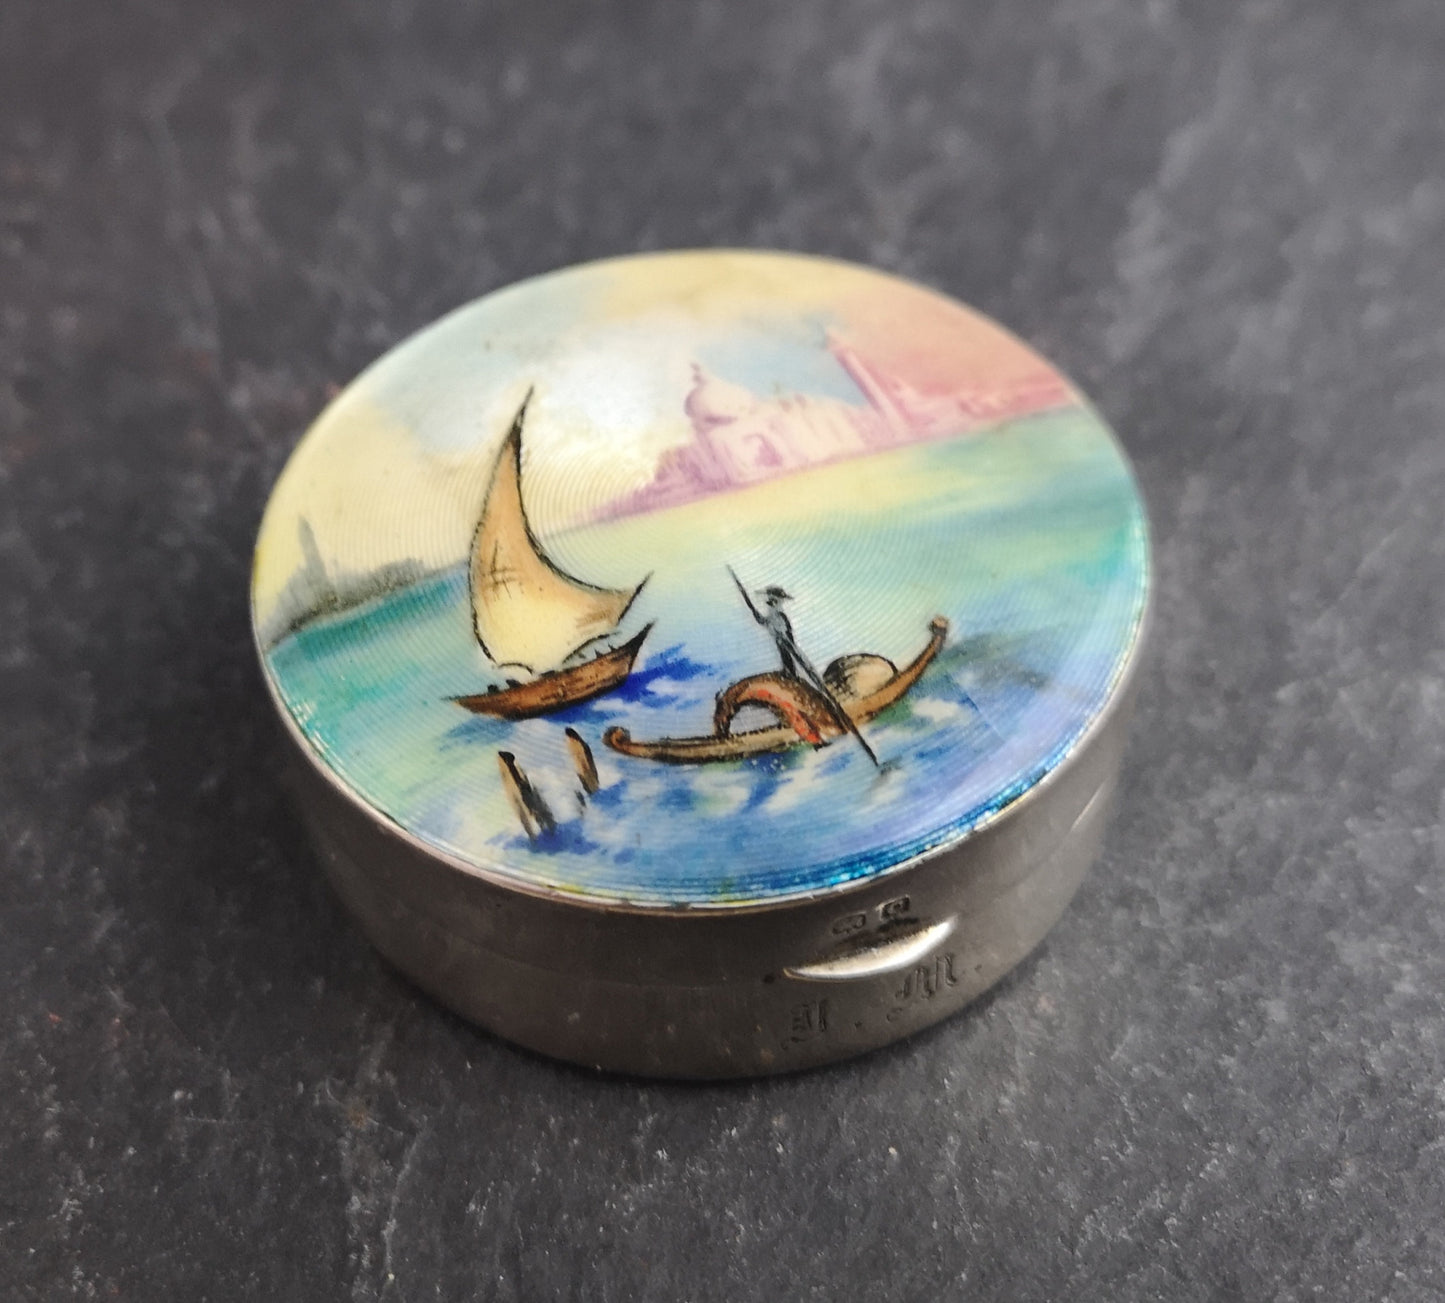 Vintage sterling silver and guilloche enamel box, hand painted scene, 1920's